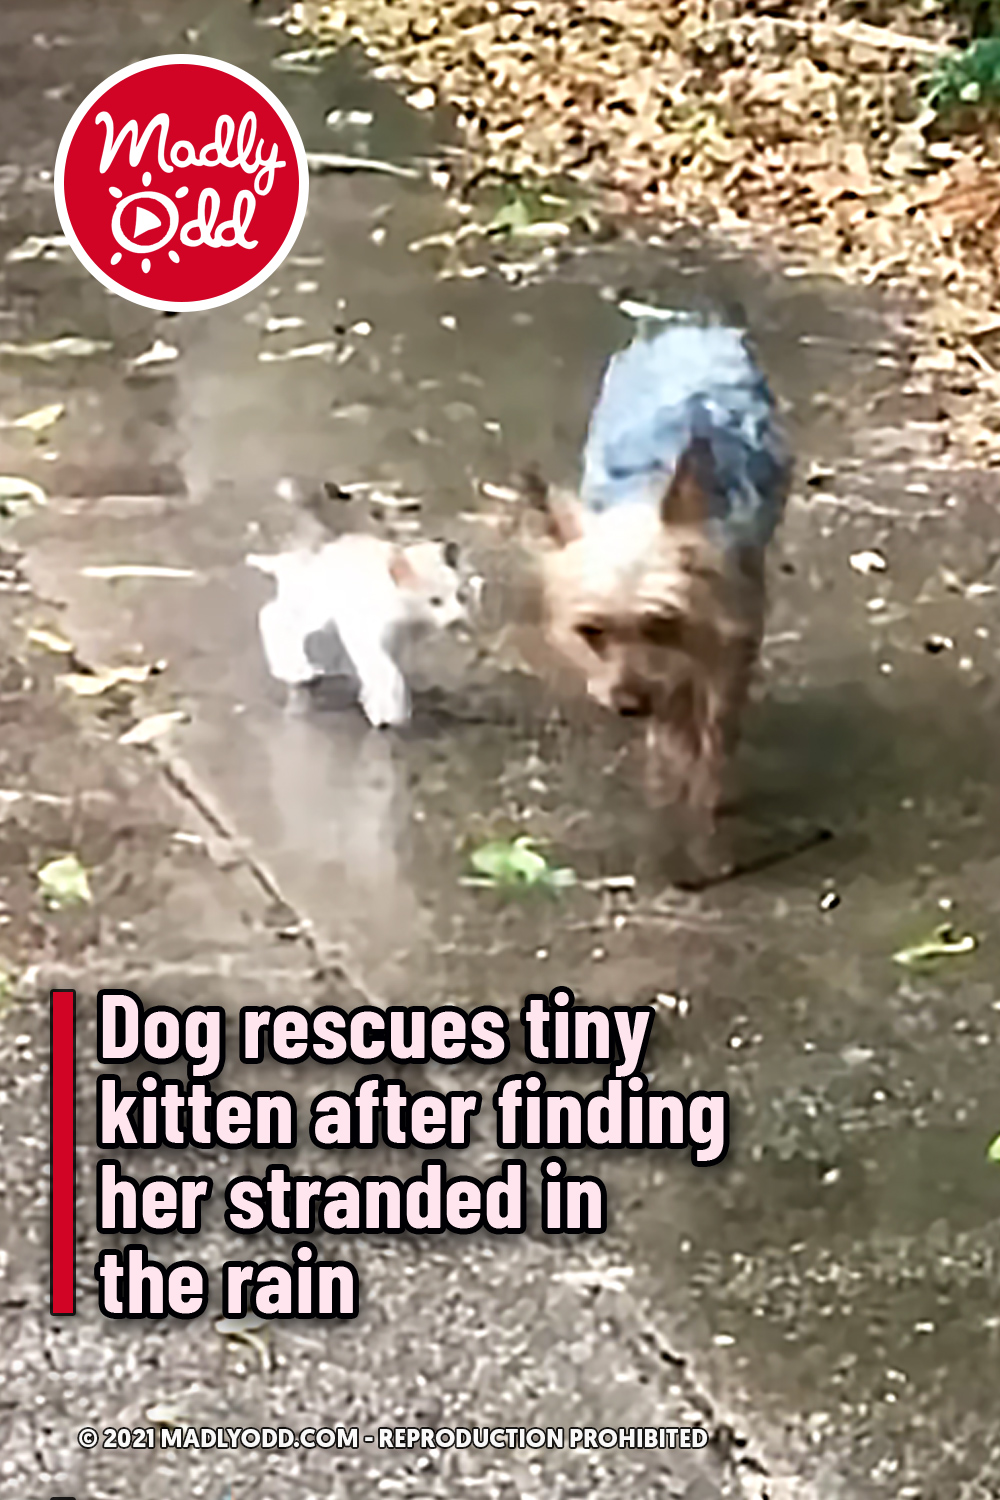 Dog rescues tiny kitten after finding her stranded in the rain